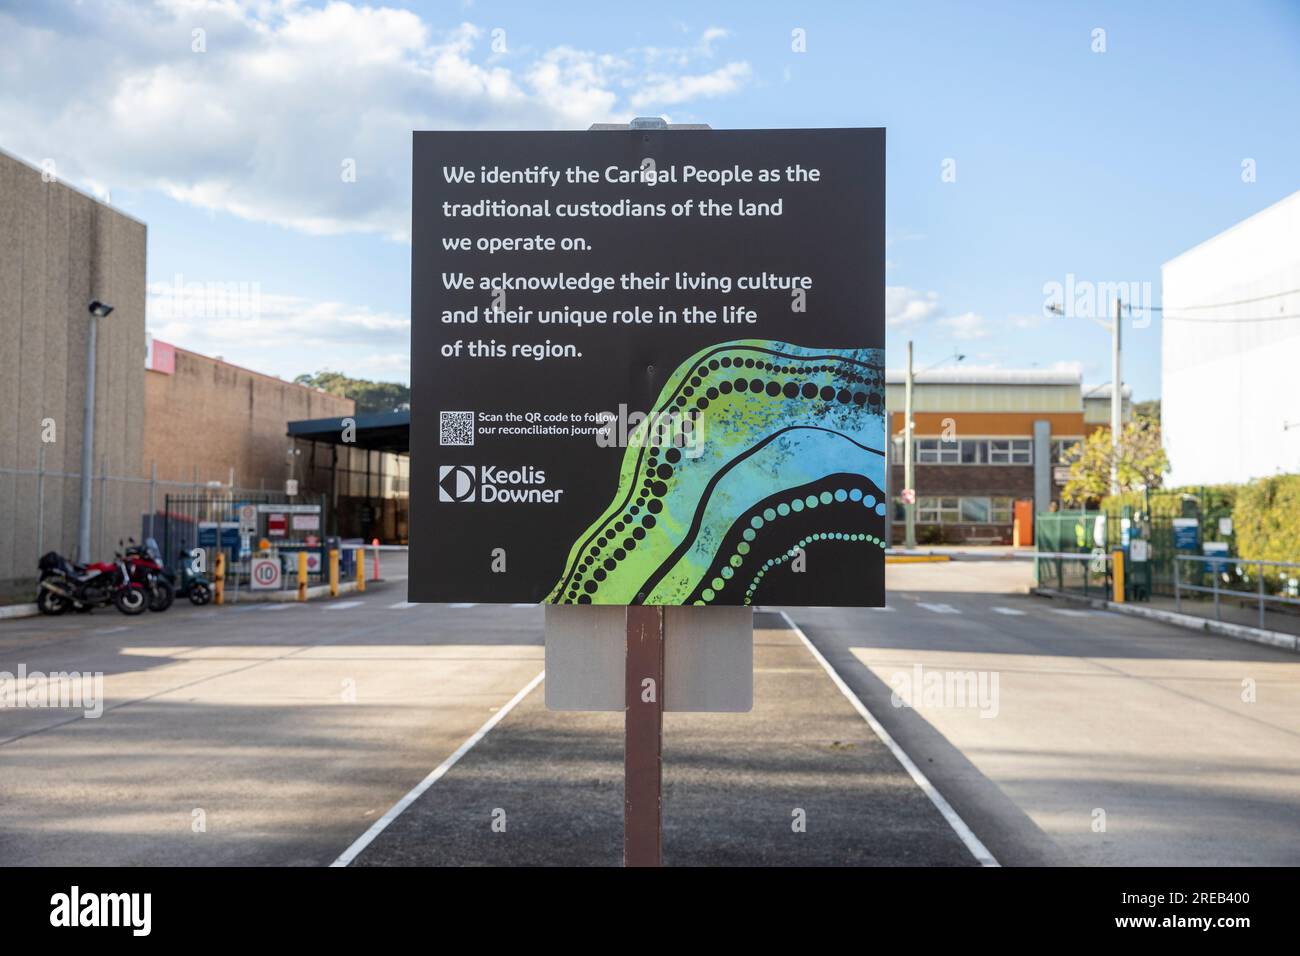 Sydney bus station with sign recognising aboriginal carigal people as traditional owners and custodians of the land,Sydney,NSW,Australia Stock Photo